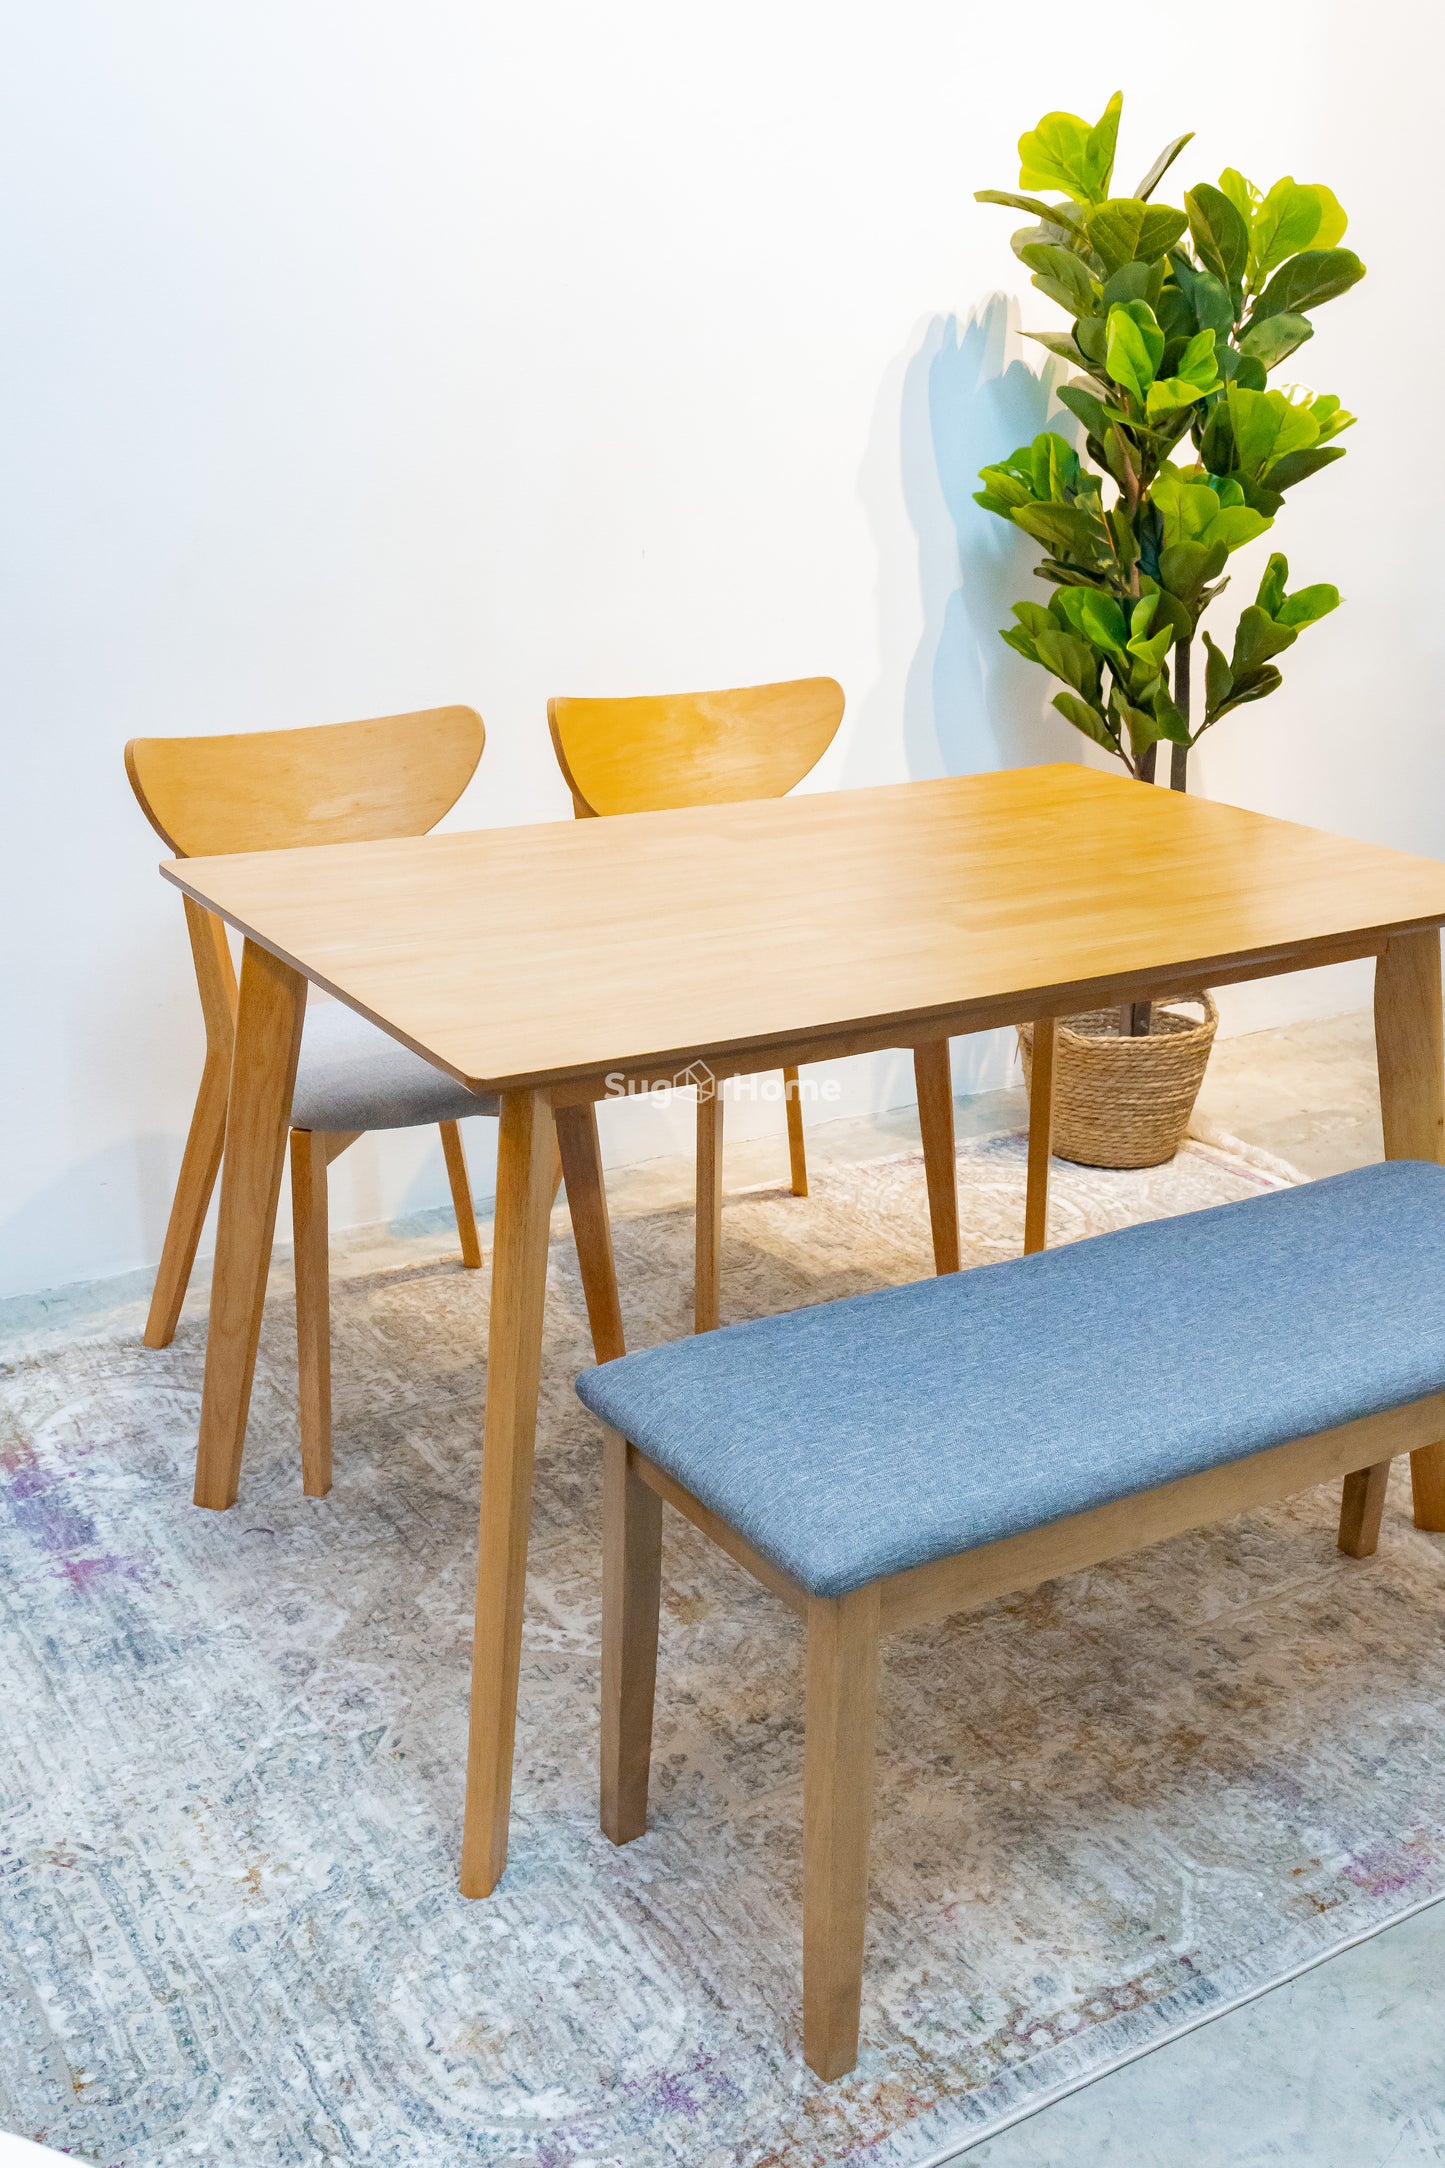 Hazelnut 1.2m Dining Table in Natural with 2 Hazel Chairs + Ava Bench